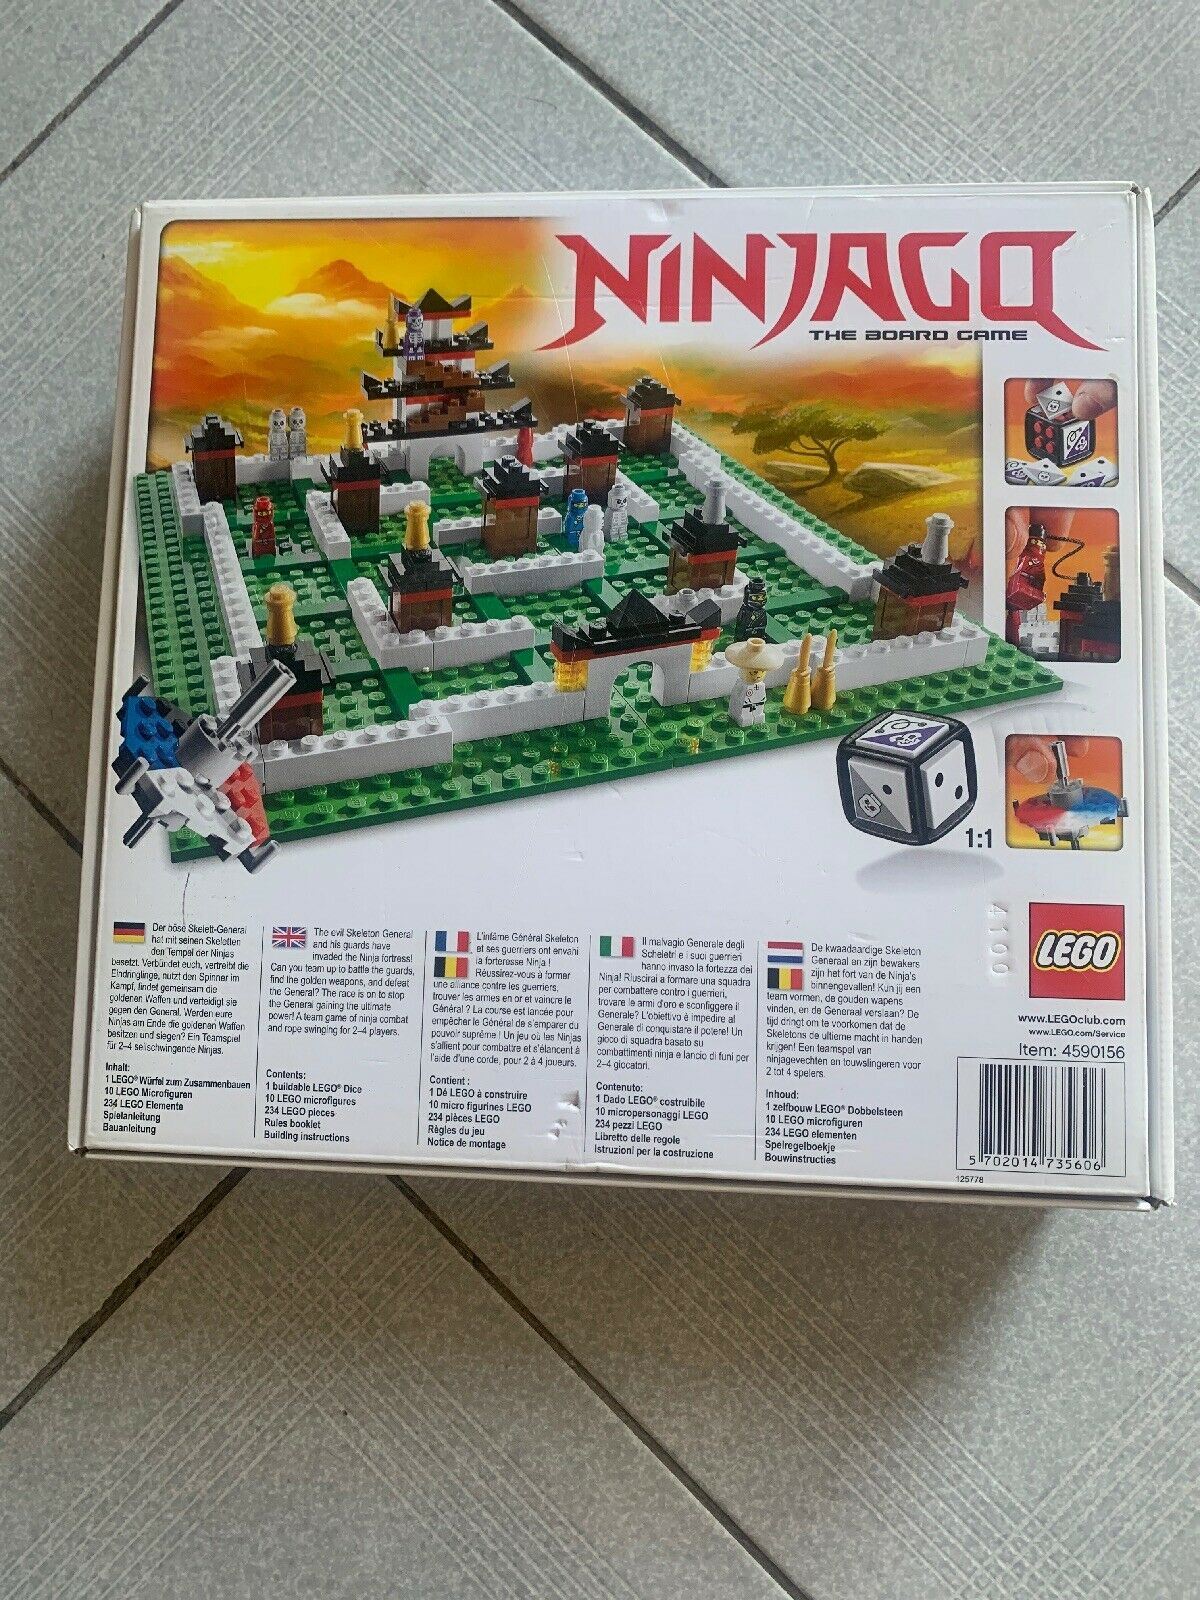 LEGO Game 3856 Ninjago The Board Game - Incomplete (218 Pieces) No Instructions